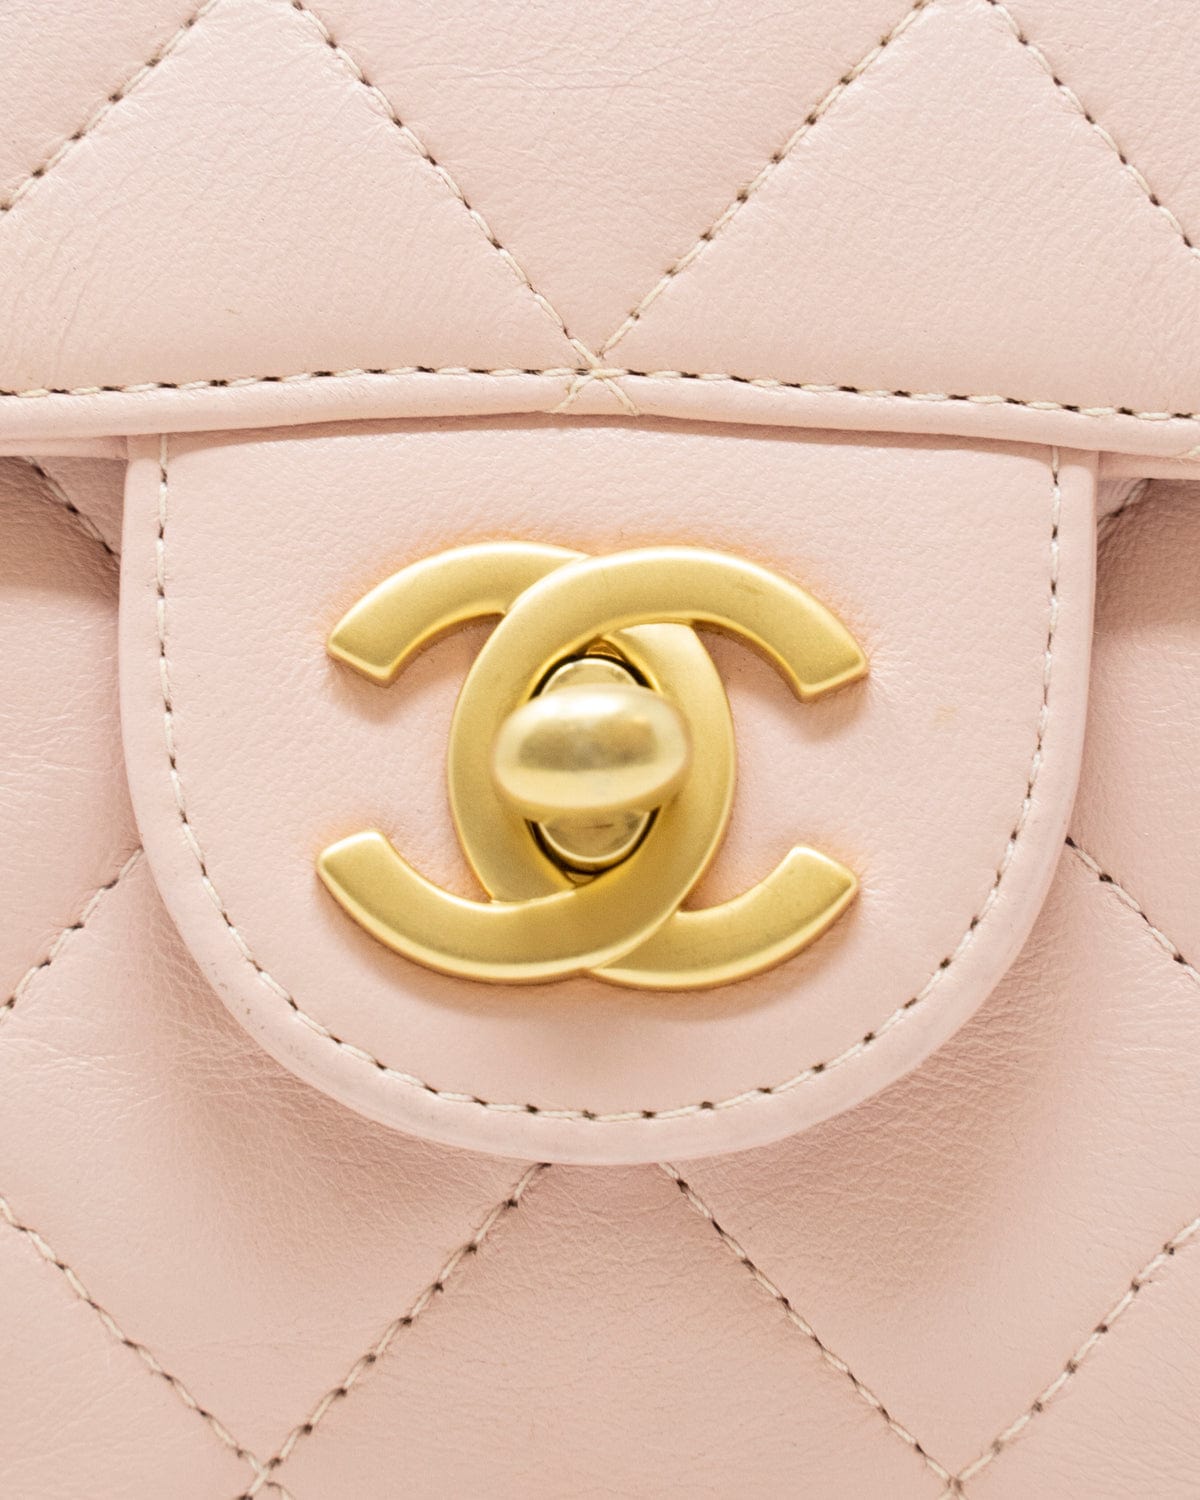 Chanel Chanel Vintage Pink 7" classic flap bag - AWL2569